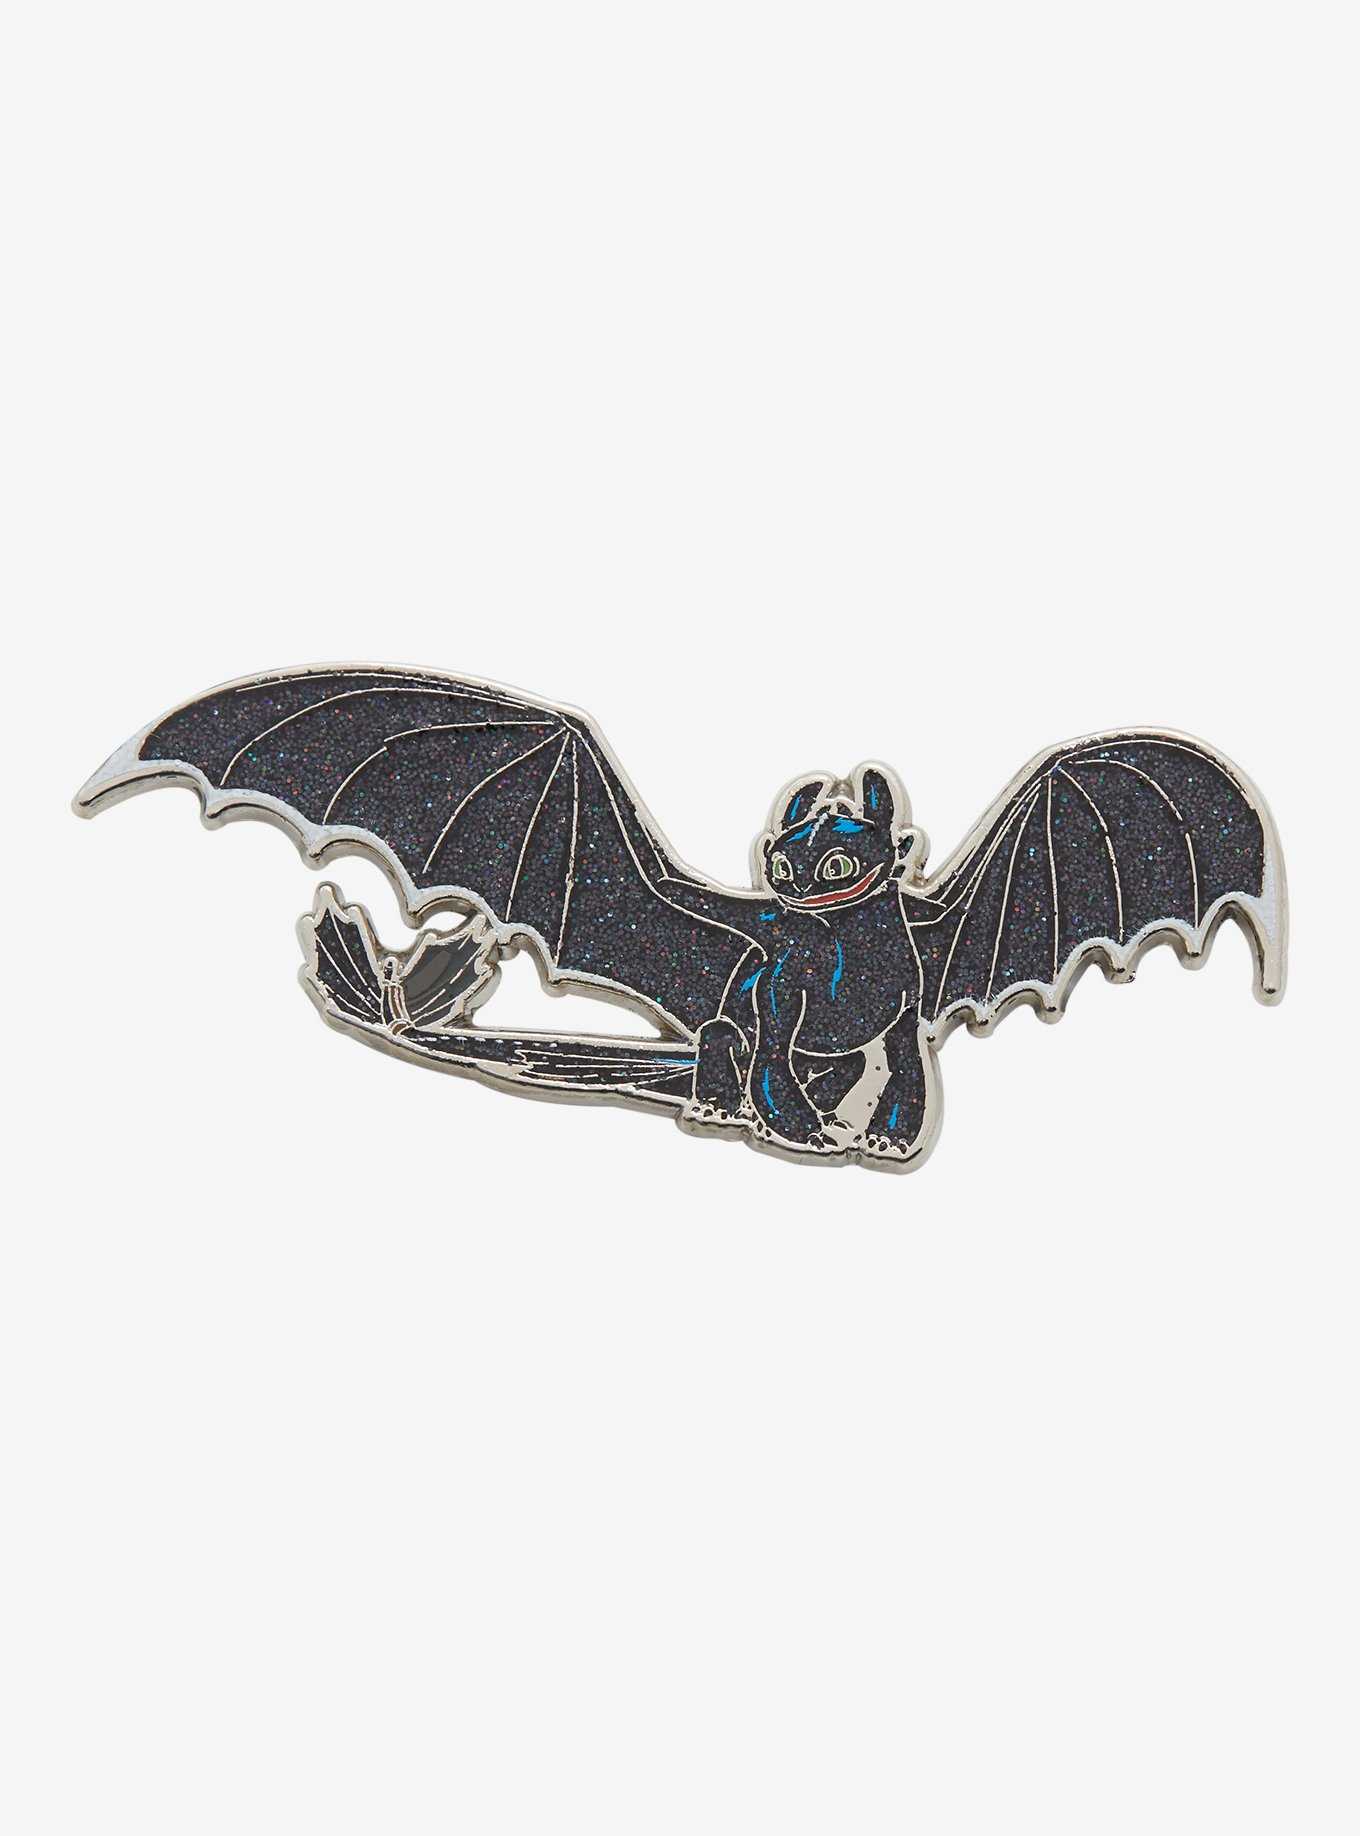 How to Train Your Dragon Toothless Glitter Portrait Enamel Pin - BoxLunch Exclusive, , hi-res